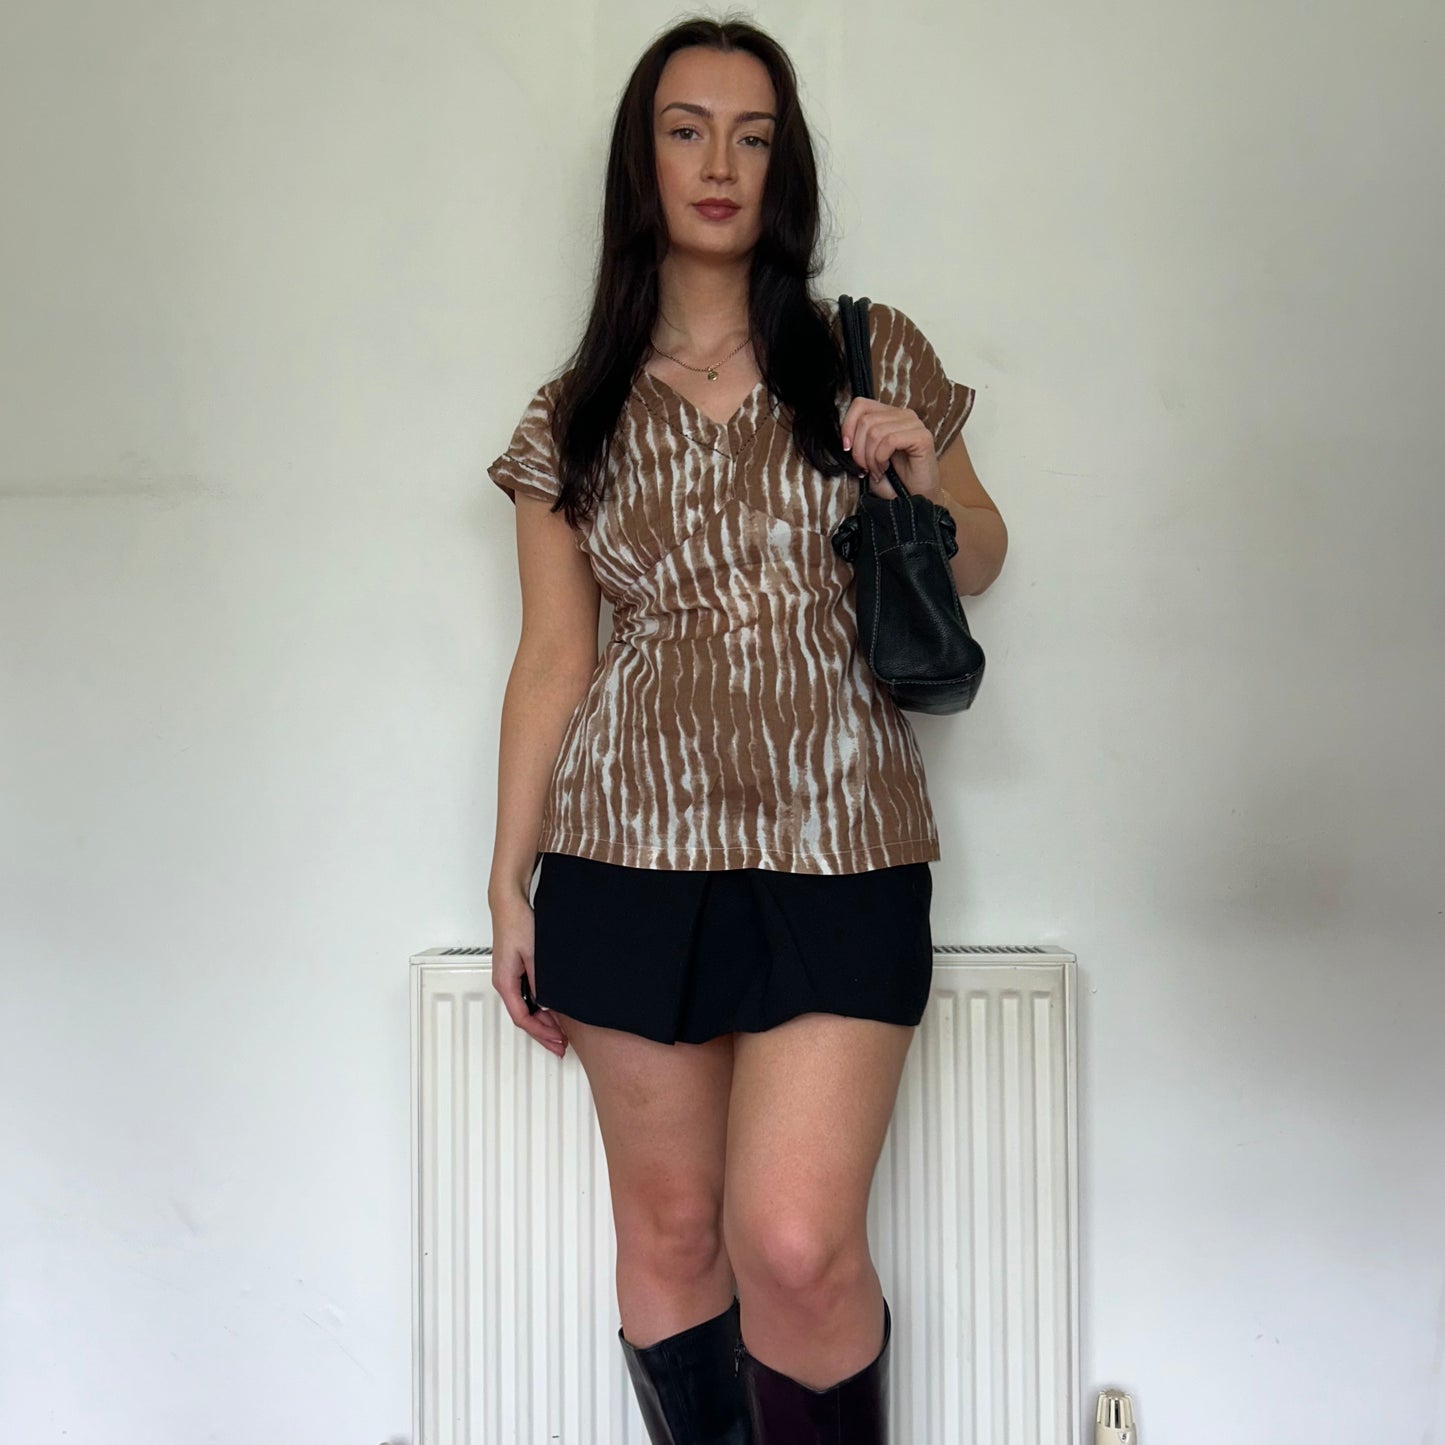 brown and white vintage top shown on a model wearing a black mini skirt and black shoulder bag with knee high boots